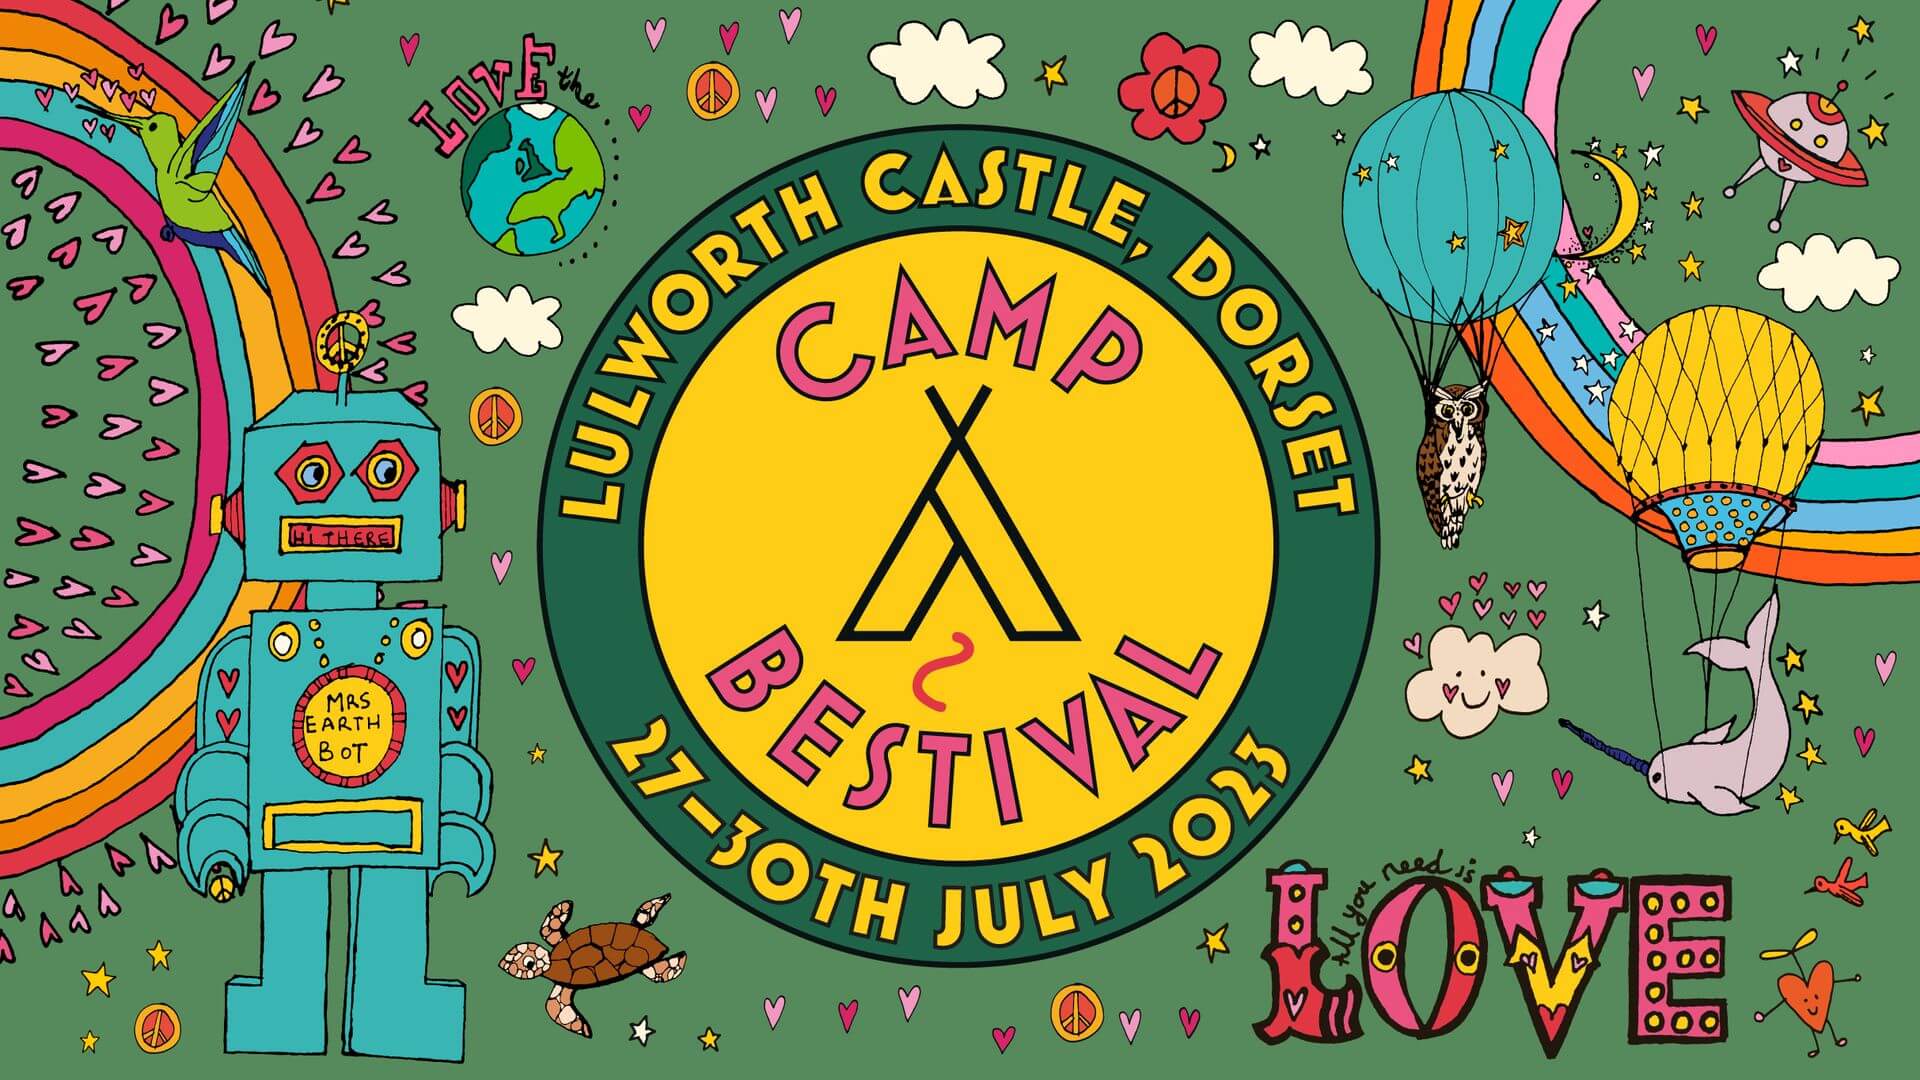 Win a family ticket to Camp Bestival with Visit Dorset